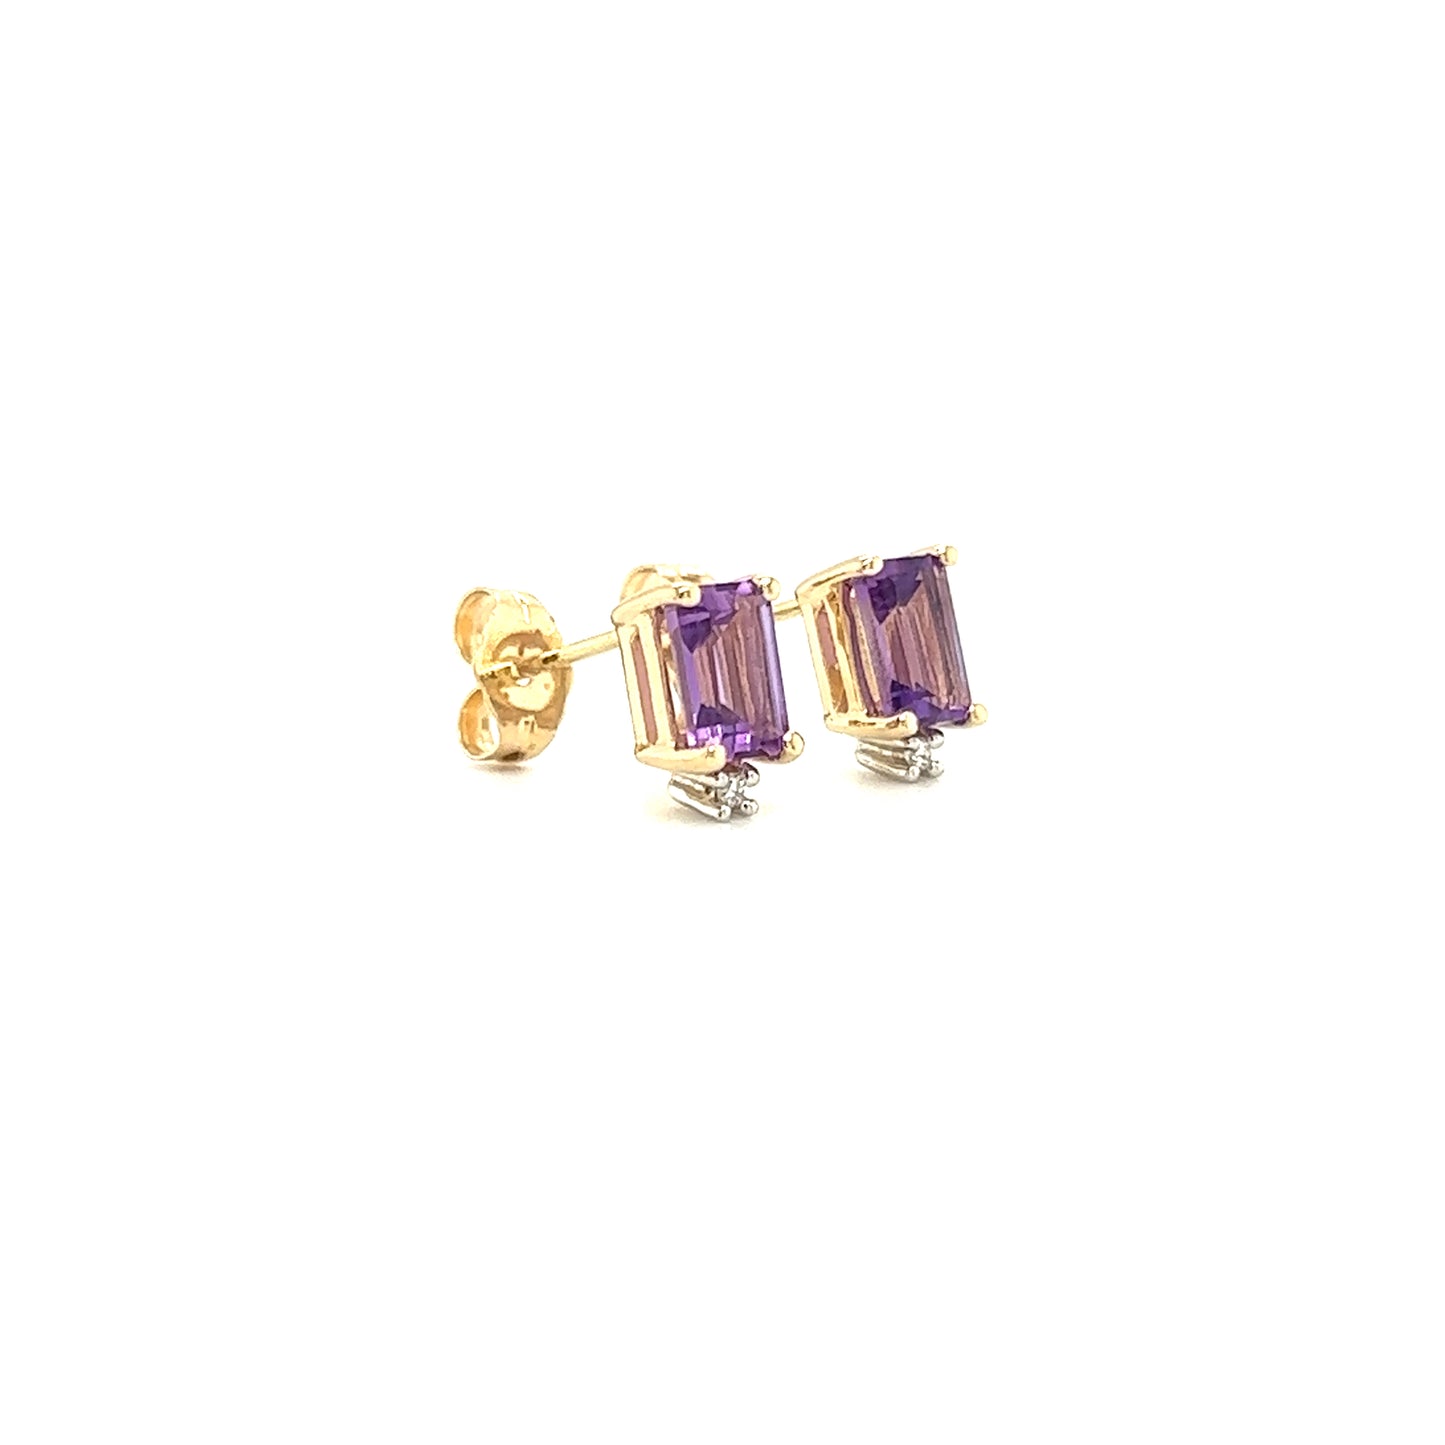 Baguette Amethyst Stud Earrings with Acent Diamonds in 14K Yellow Gold Left Side View